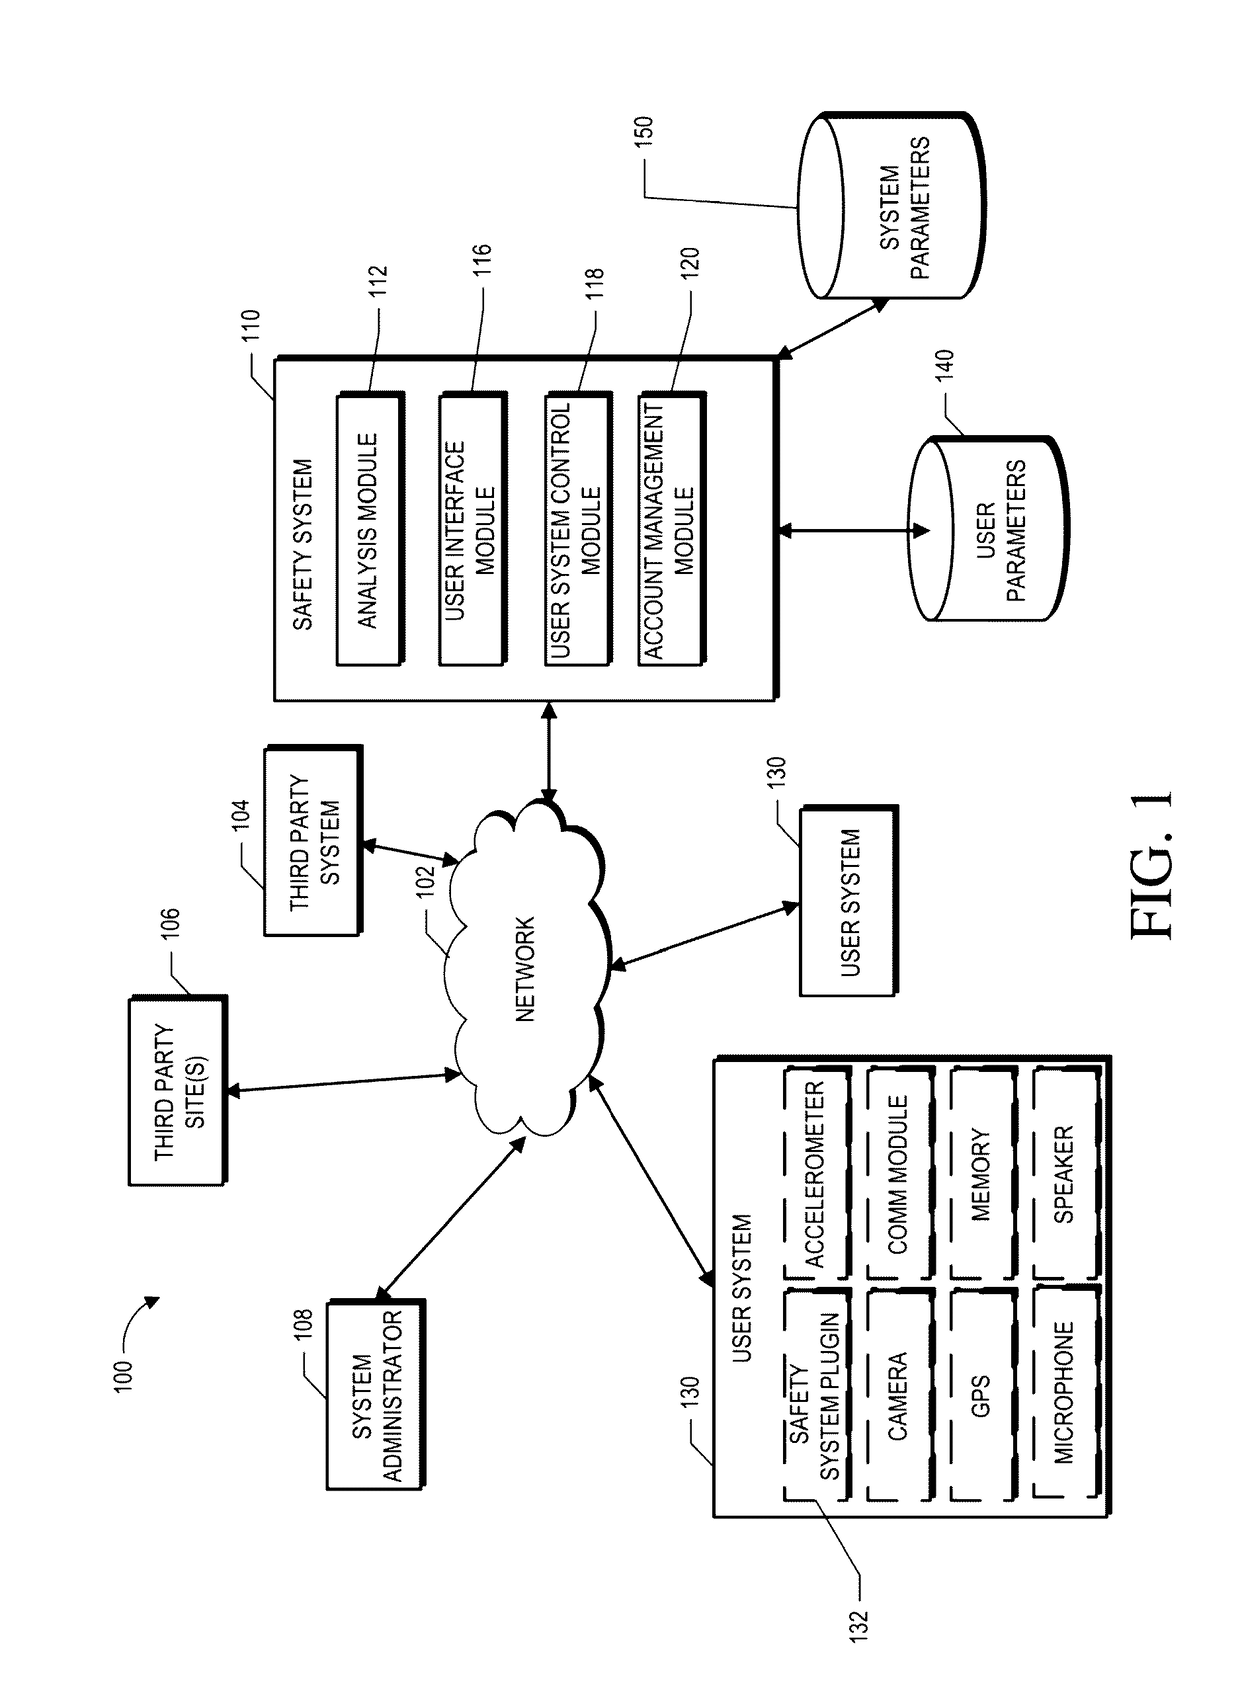 Management and control of mobile computing device using local and remote software agents